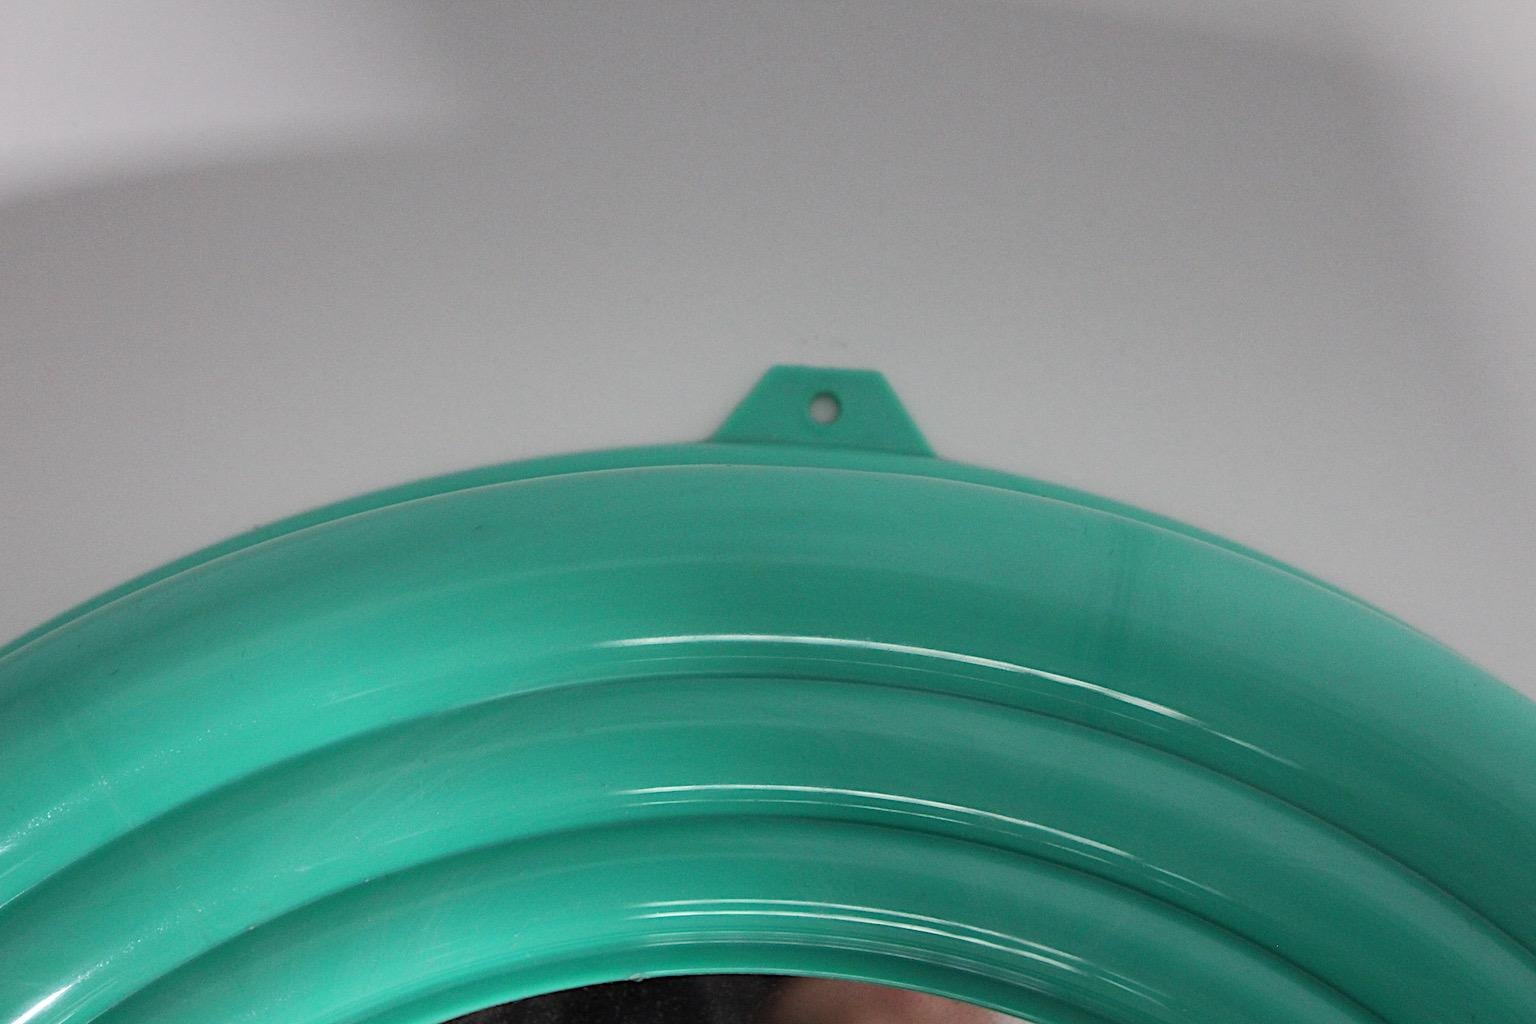 Late 20th Century Pop Art Style Green Teal Circular Plastic Wall Mirror 1990s Italy For Sale